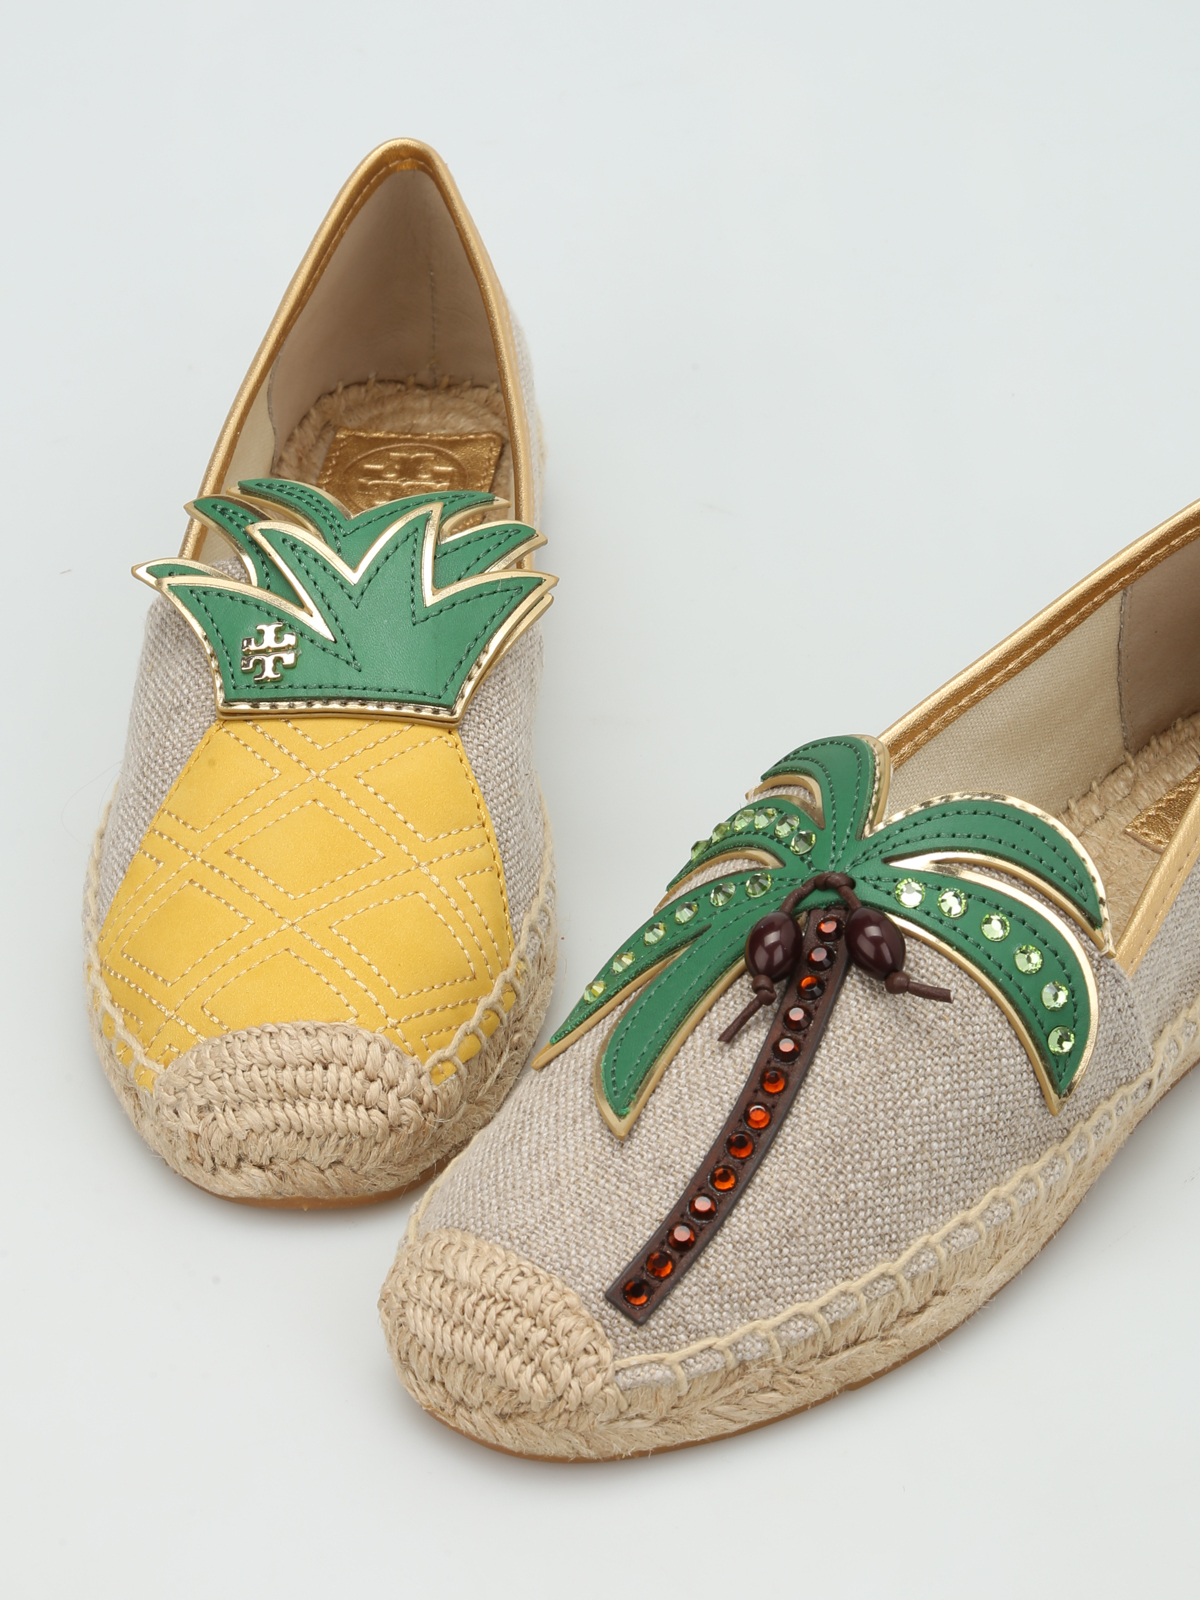 tory burch espadrille shoes